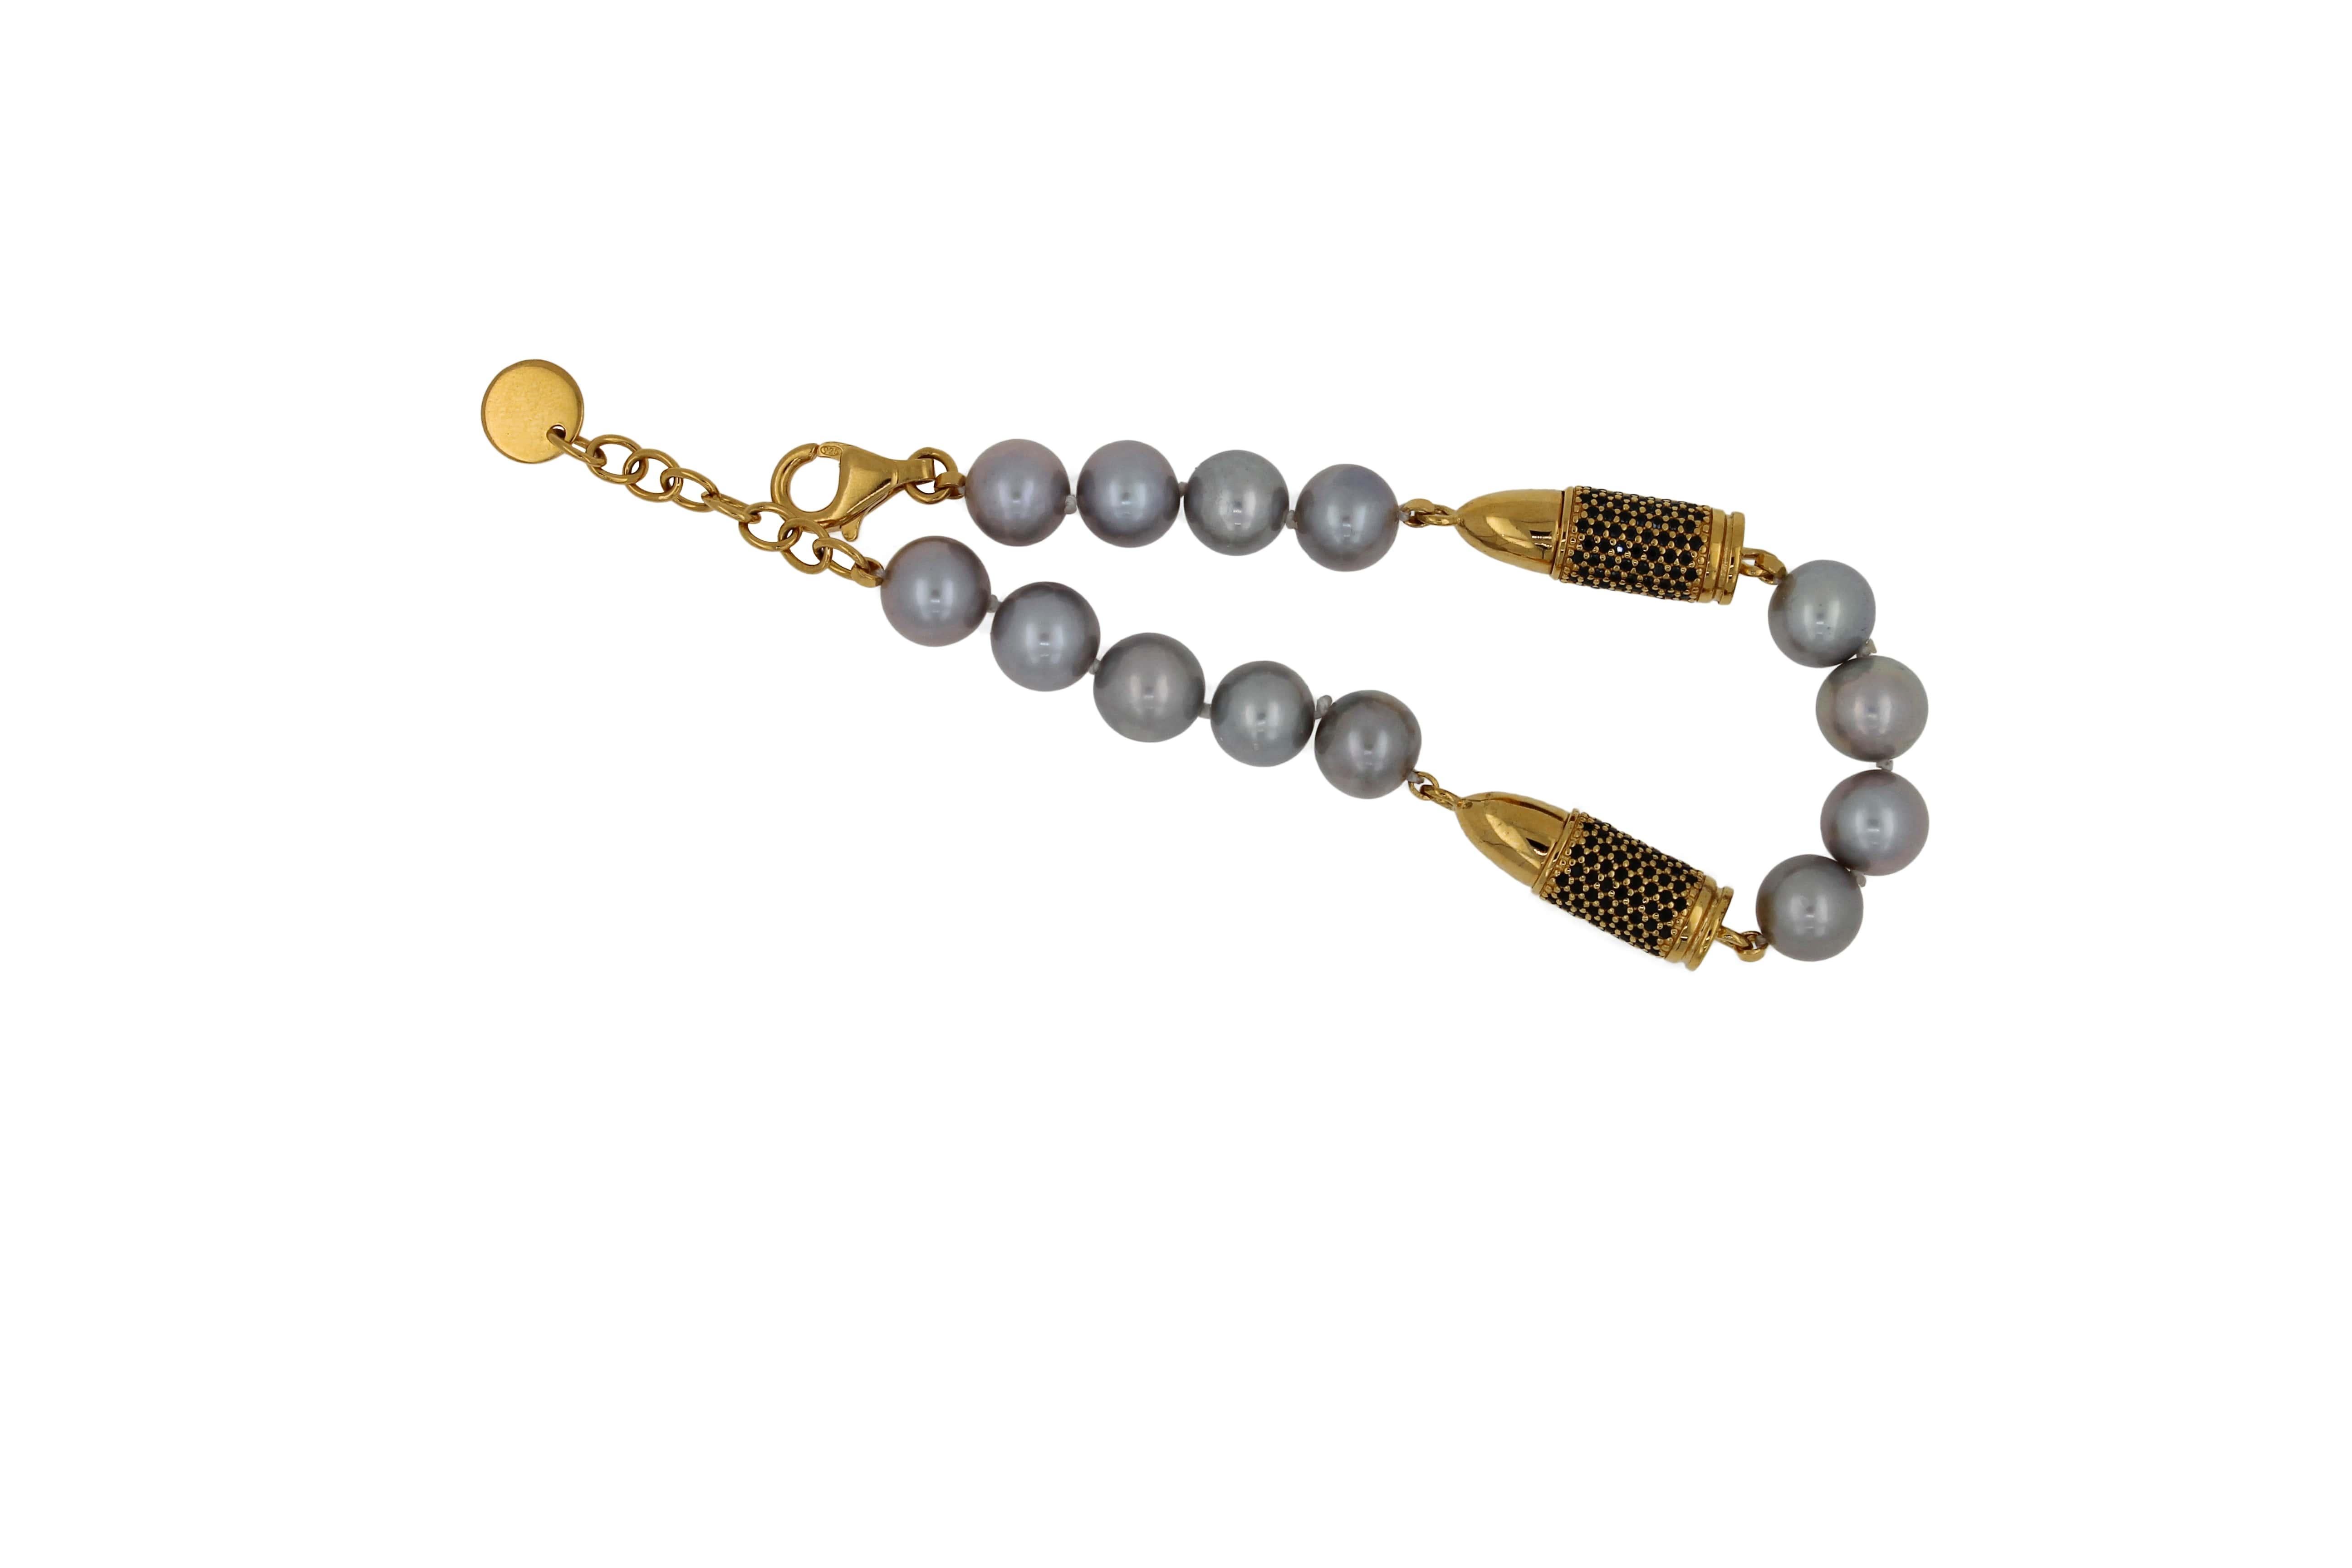 *Genuine Black Spinel Gemstones 2.50 CTW
* Natural Silver Pearls
* 925 Sterling Silver & 18K Gold Vermeil
* 7 to 8.7 Inches Adjustable Clasp
* In-Stock & Ready to Ship